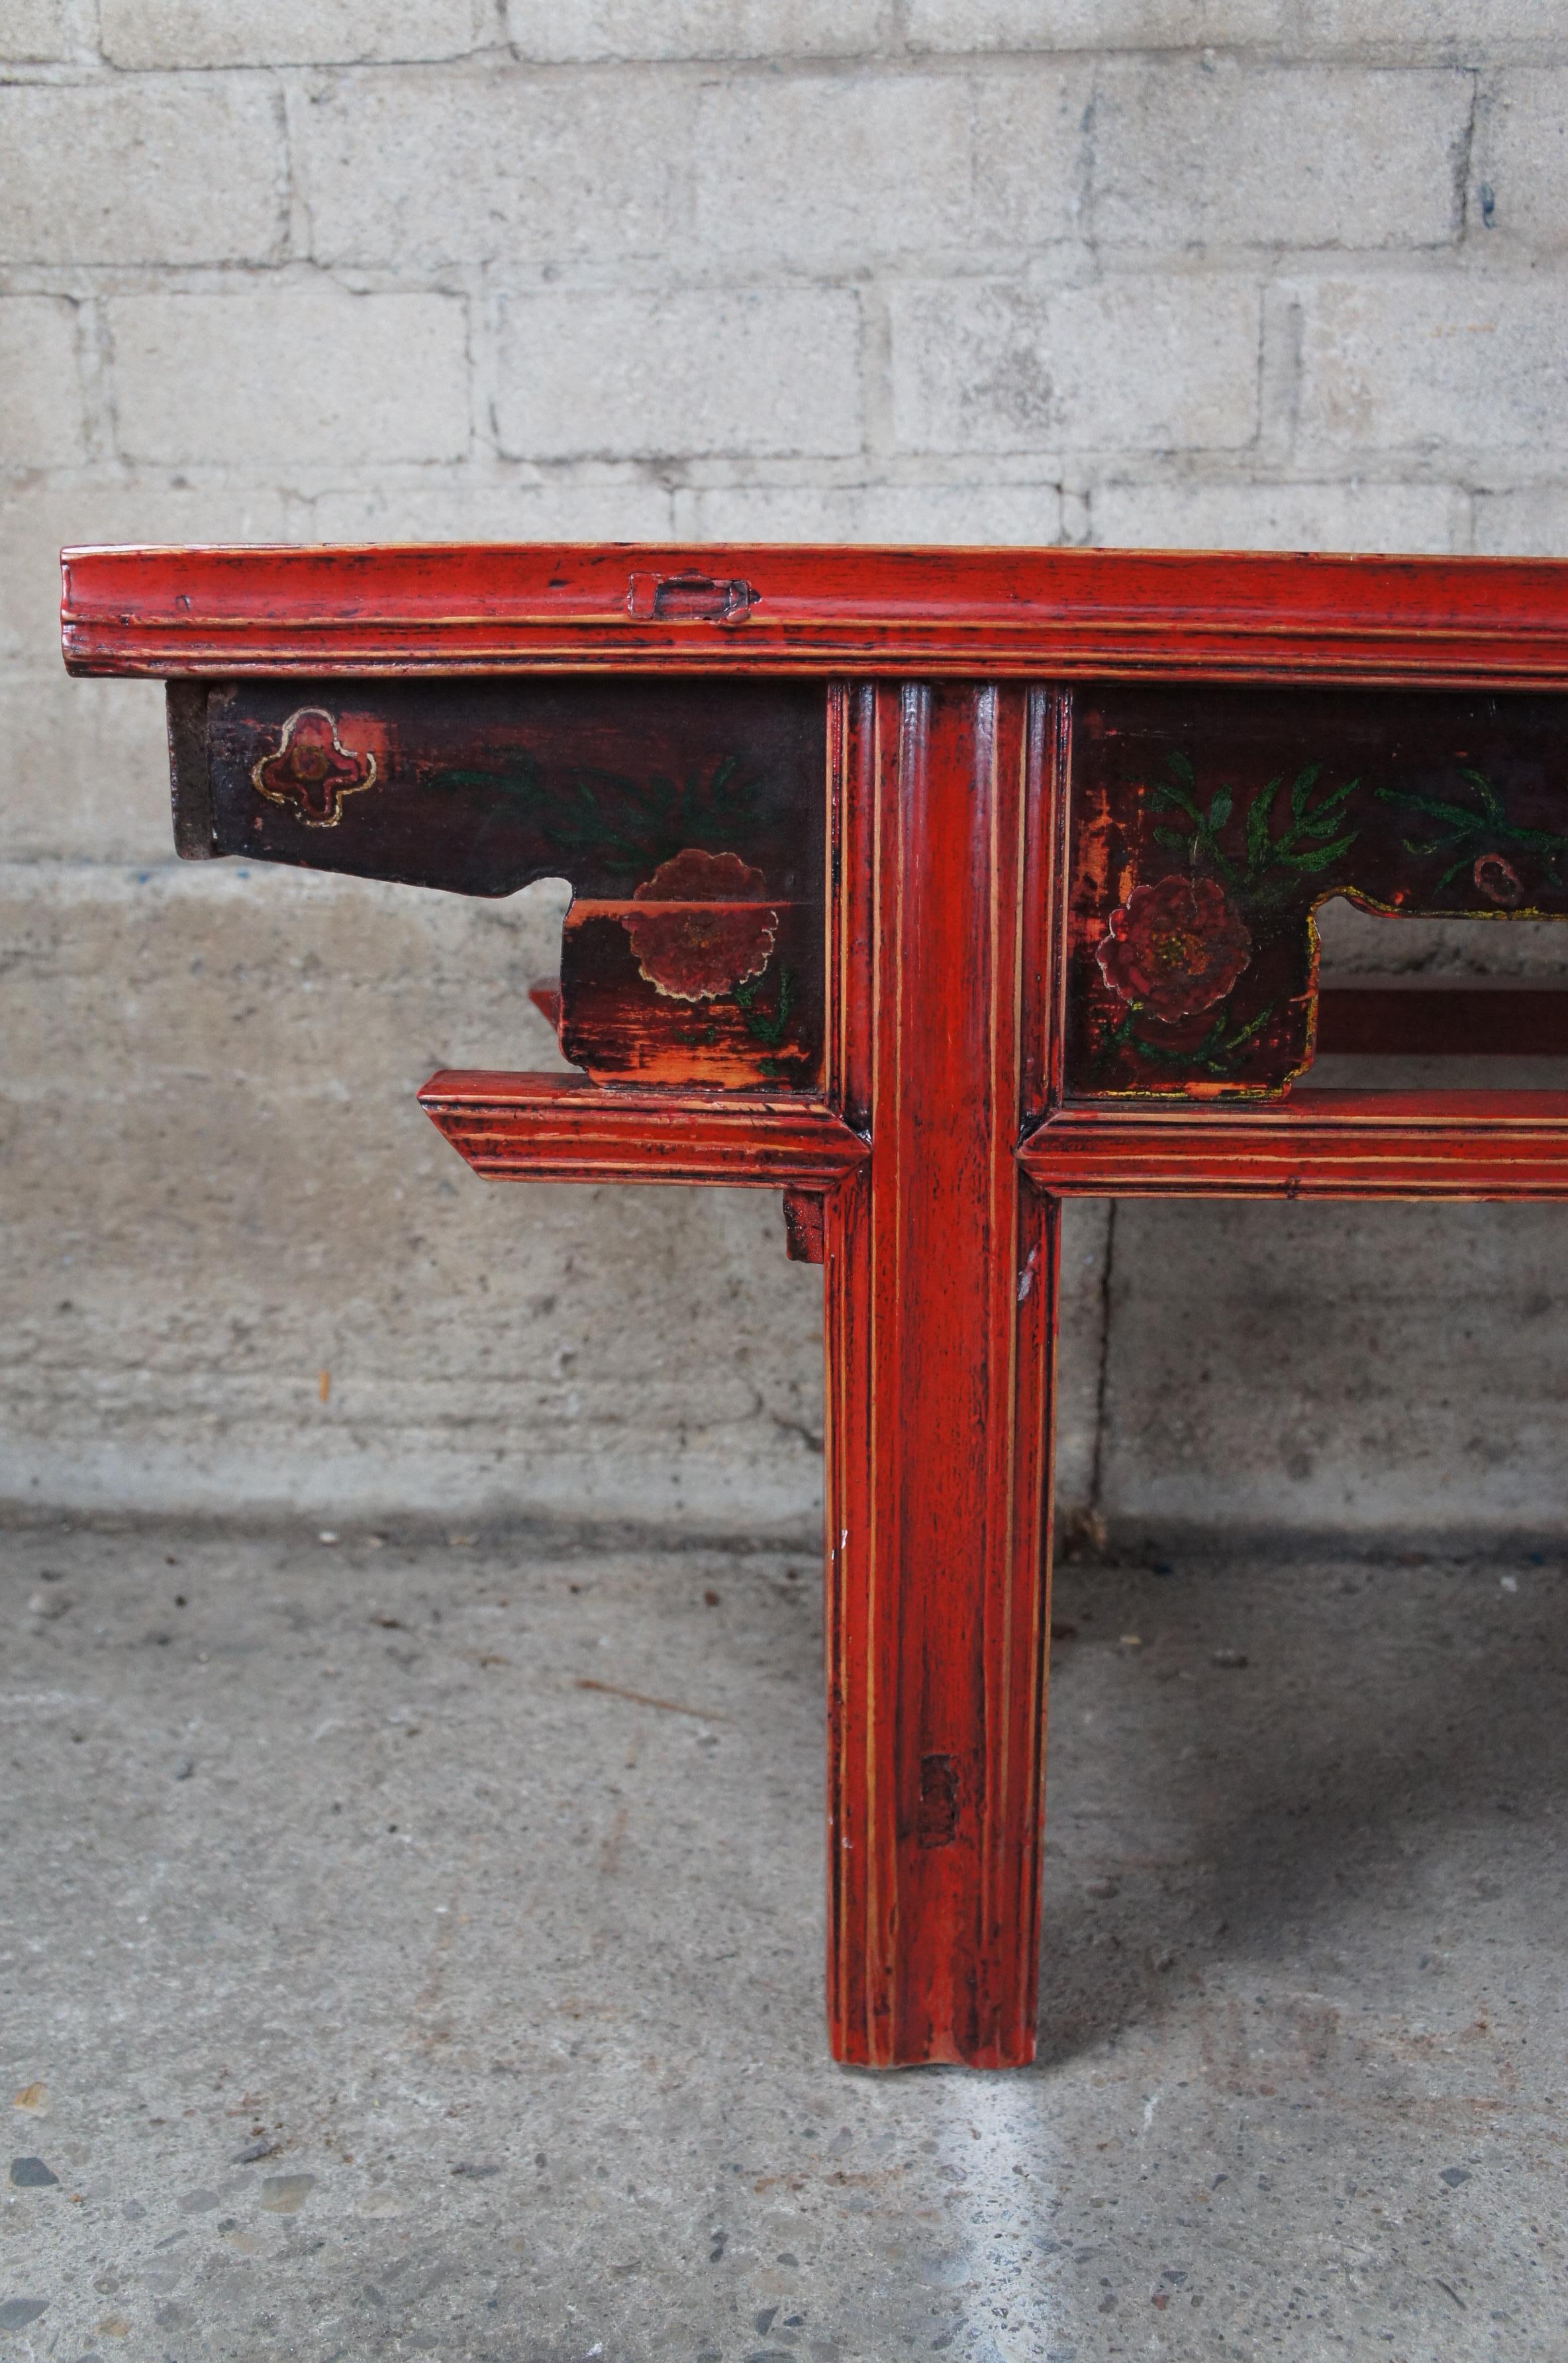 20th Century Chinese Elm Red Lacquer Chinoiserie Altar Hallway Bench Seat Pew In Good Condition For Sale In Dayton, OH